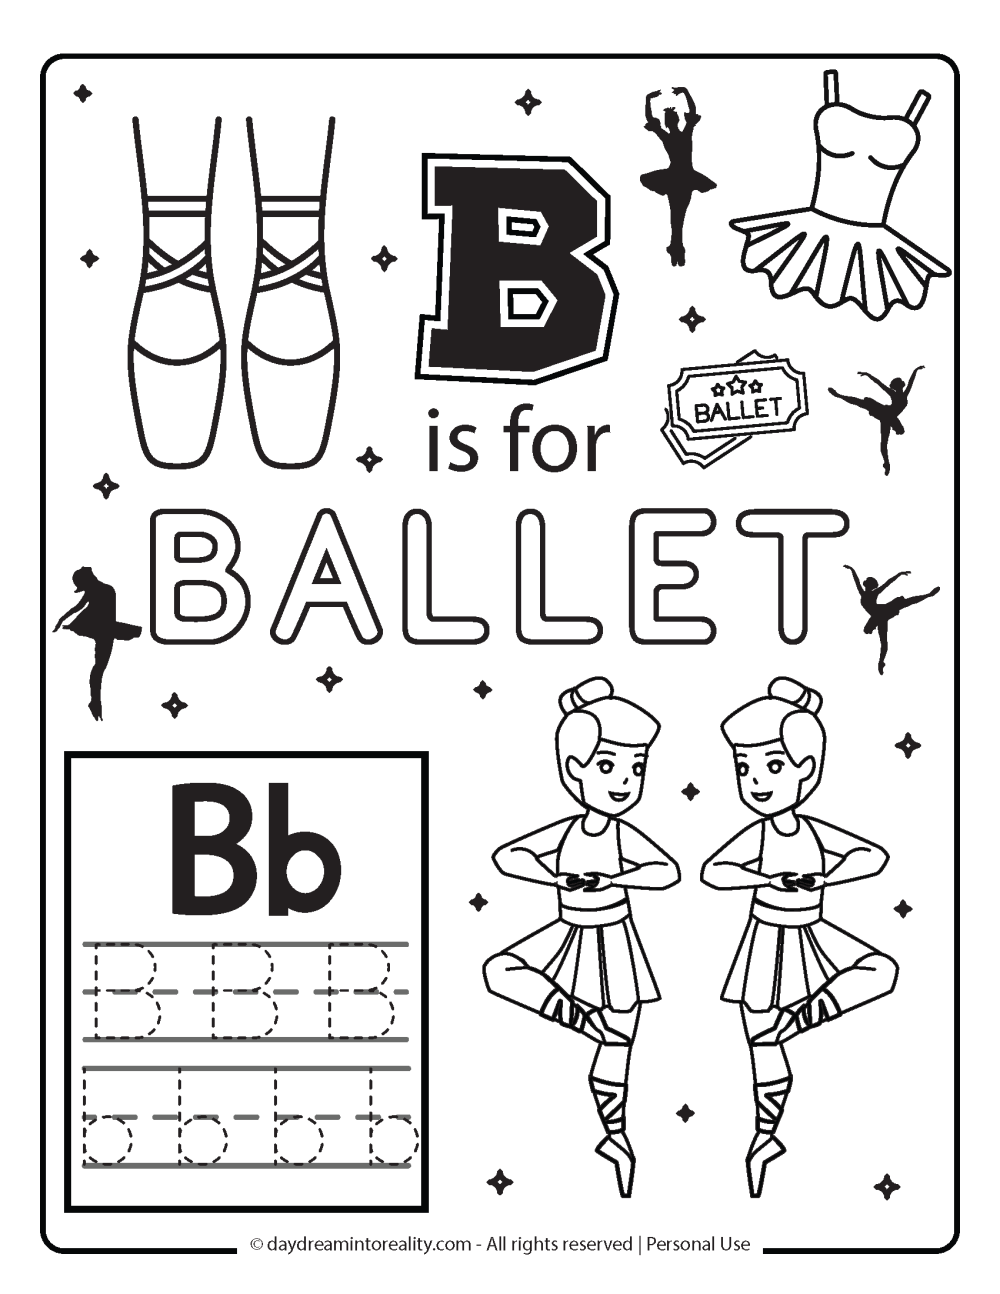 b is for ballet coloring page free printable